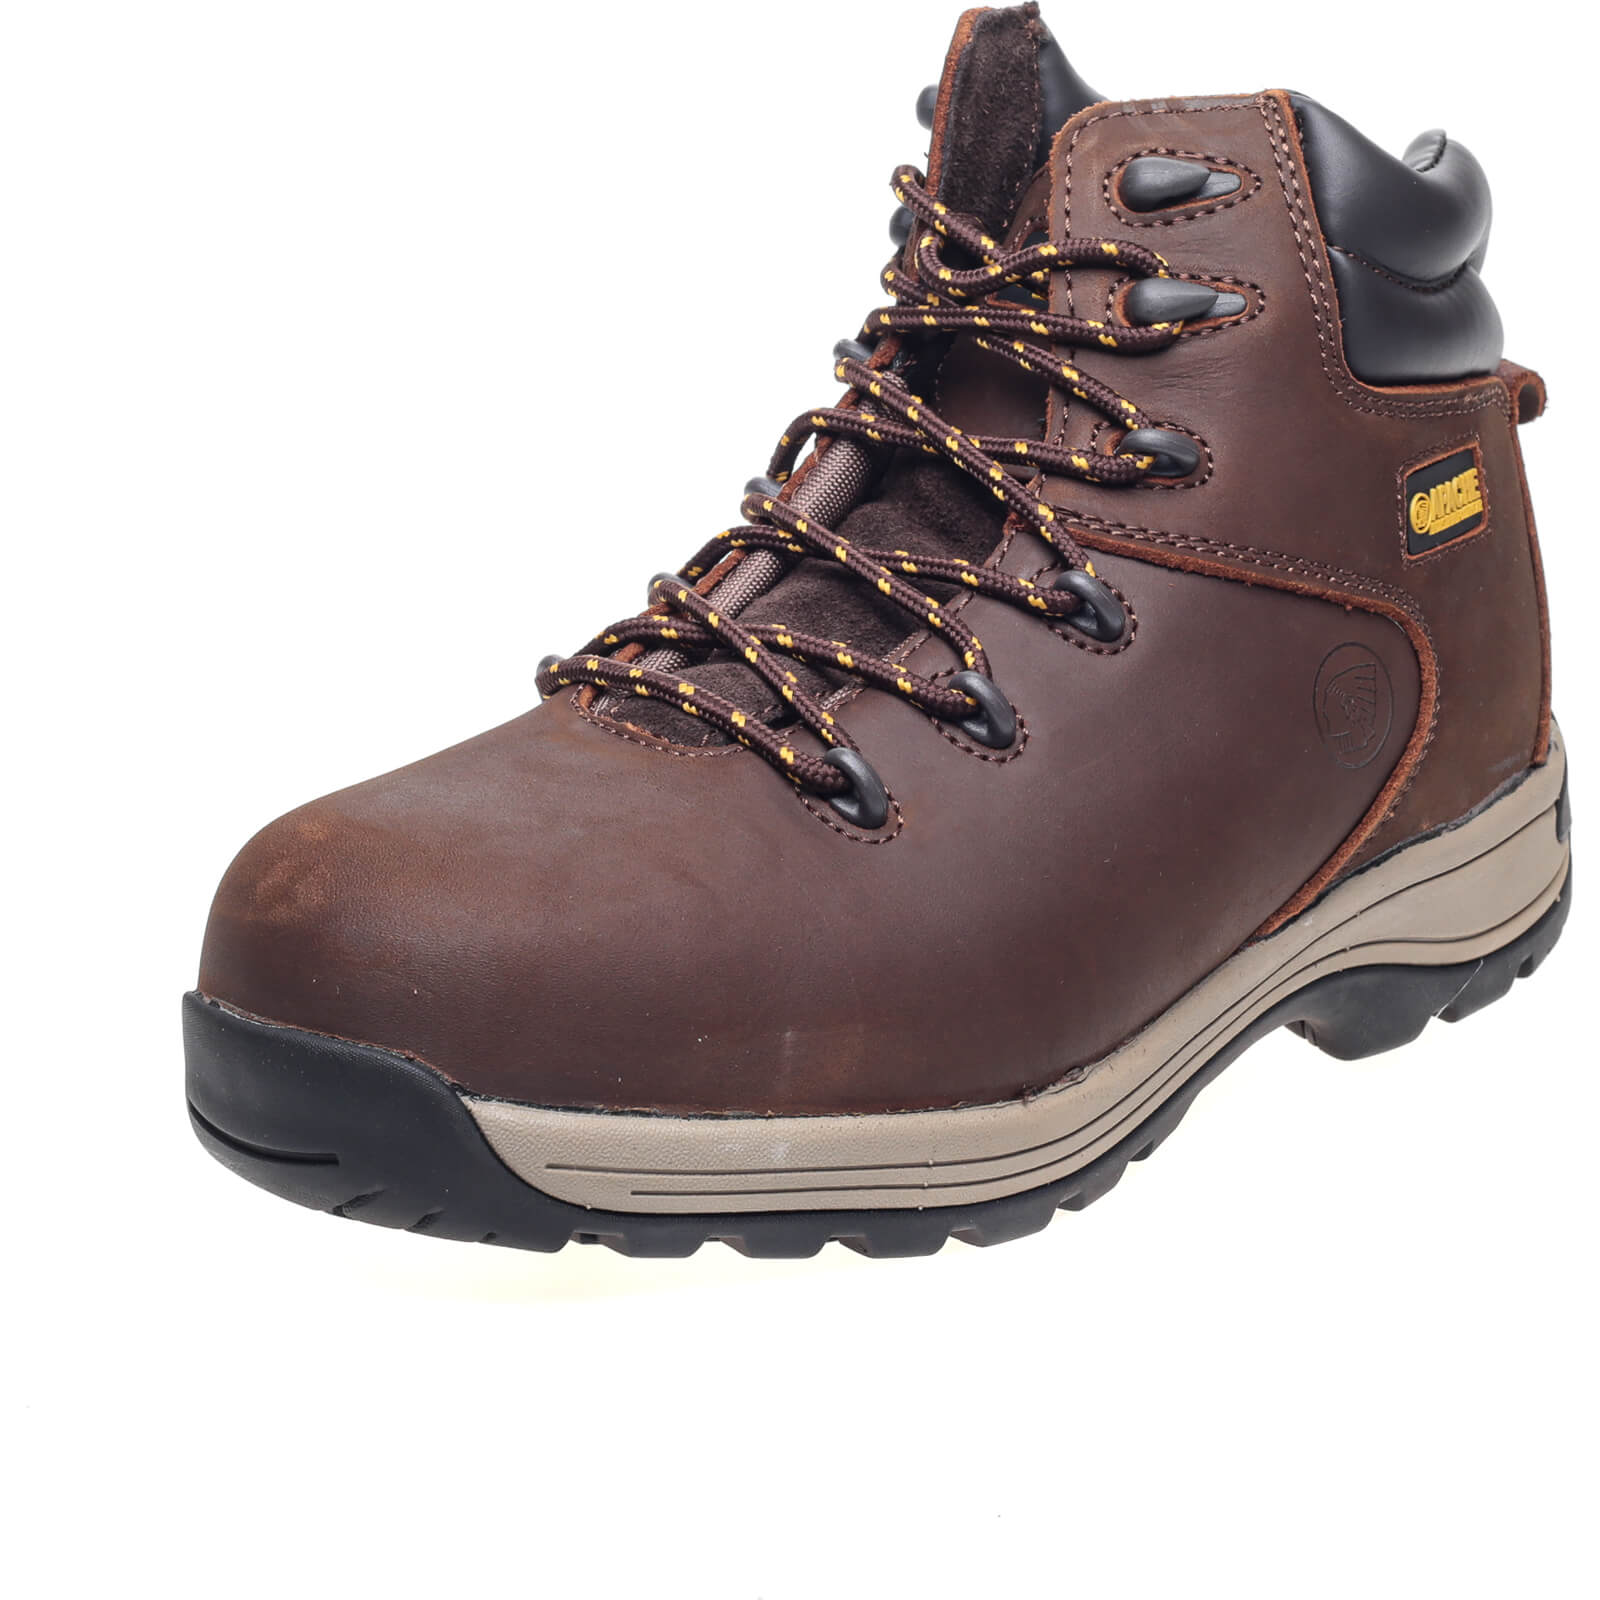 Apache AP31 Nubuck Water Resistant Safety Hiker Boots Brown Size 10